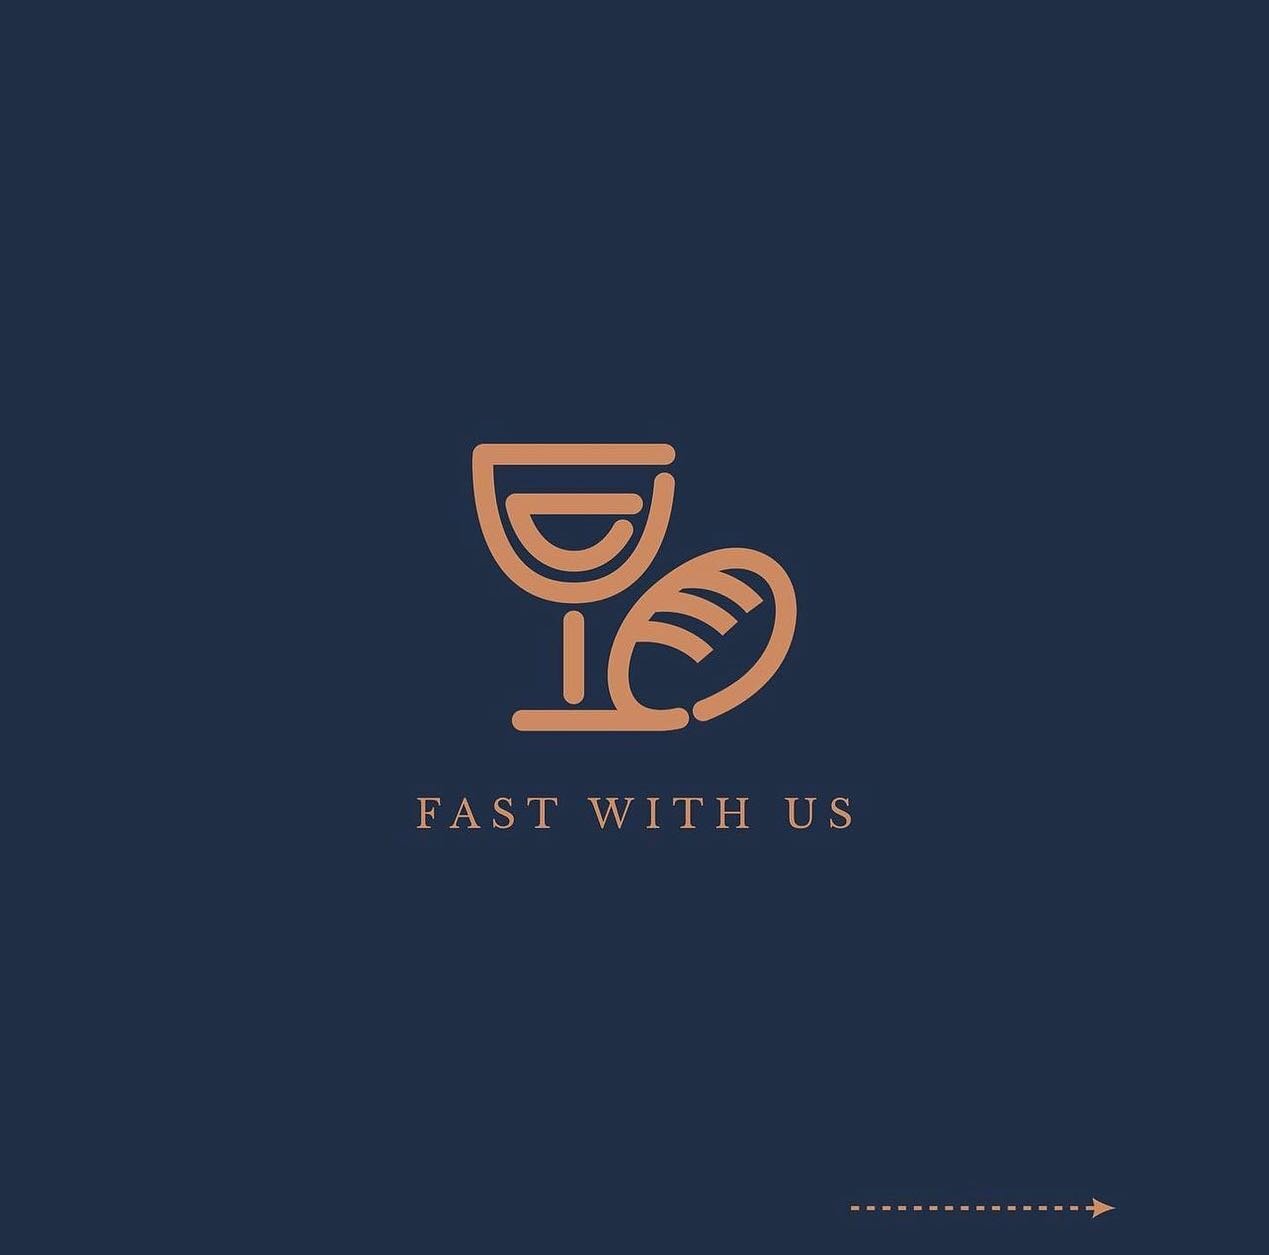 Fast with us Thursday (3/28)! 🙏  Pray throughout the day for whatever is on your mind or heart.  We&rsquo;ll break the fast together on Friday morning (930am in The Hub) as we prepare for Easter. We&rsquo;ll have breakfast for everyone even if you d